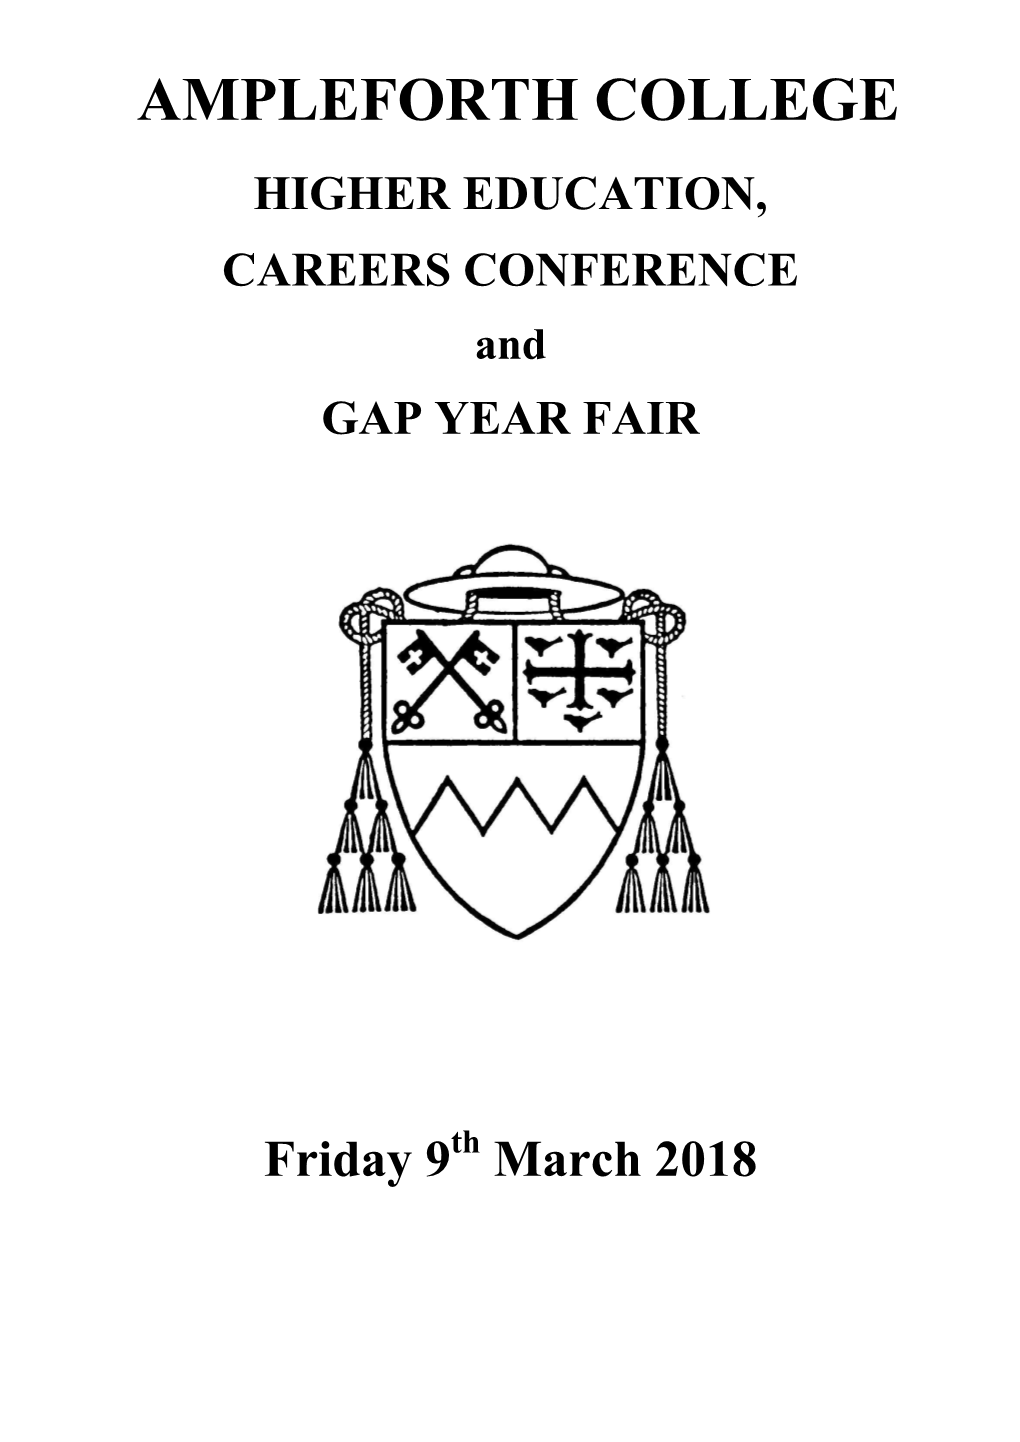 AMPLEFORTH COLLEGE HIGHER EDUCATION, CAREERS CONFERENCE and GAP YEAR FAIR